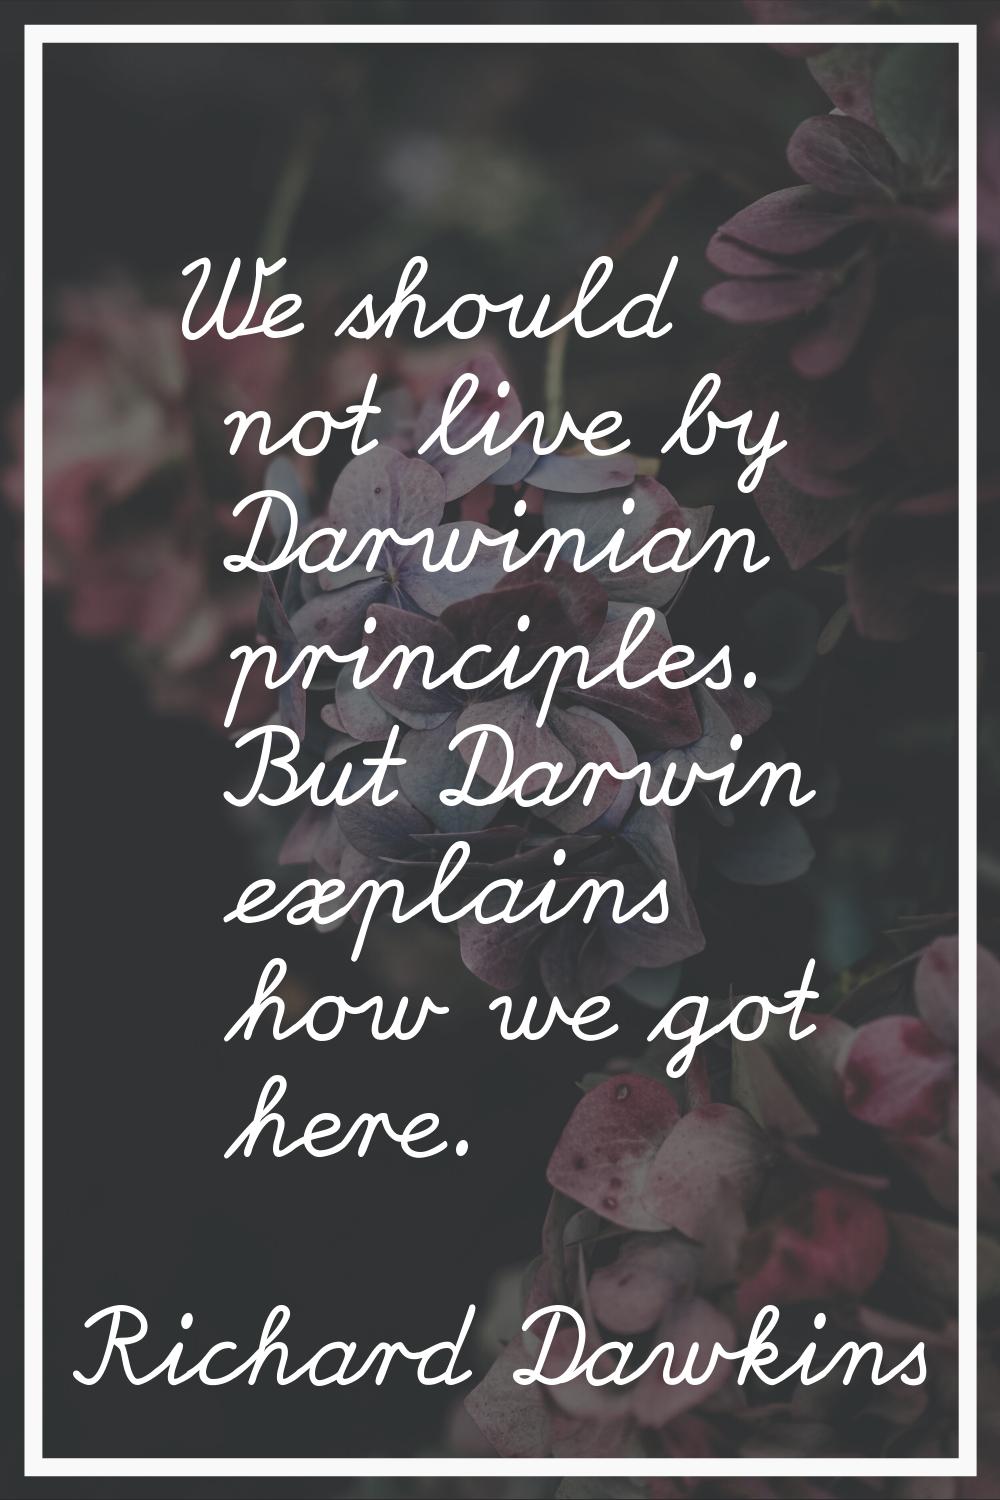 We should not live by Darwinian principles. But Darwin explains how we got here.